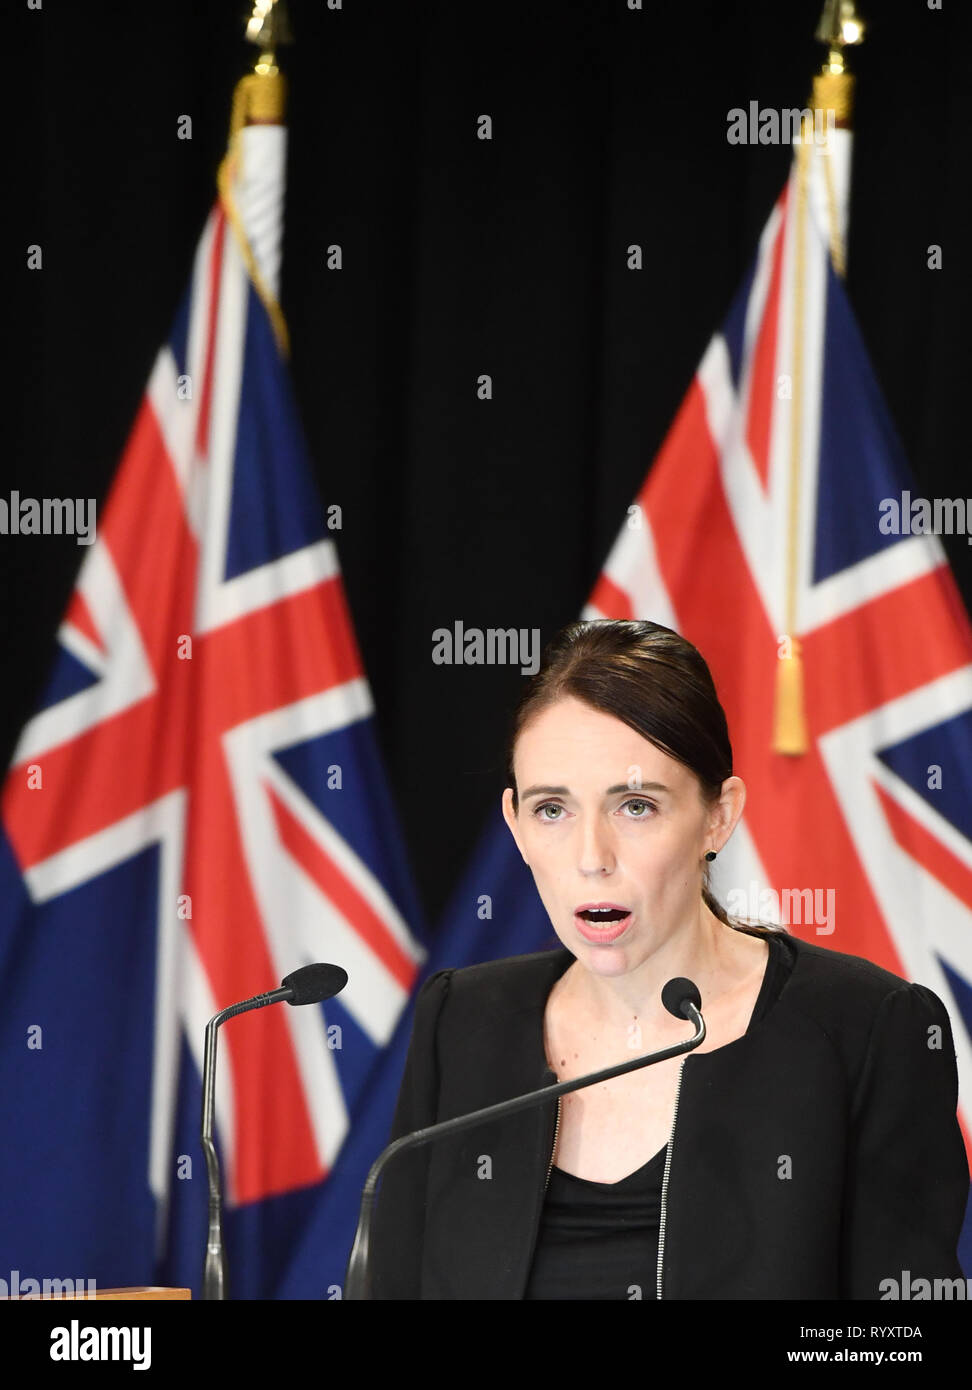 Wellington, New Zealand. 16th Mar, 2019. New Zealand Prime Minister Jacinda Ardern addresses a briefing in Wellington, capital of New Zealand, on March 16, 2019. Jacinda Ardern reiterated to the public on Saturday morning that the country's gun law will be changed. Gunmen opened fire in two separate mosques in Christchurch on Friday, killing 49 people and wounding 48 others. Credit: Guo Lei/Xinhua/Alamy Live News Stock Photo